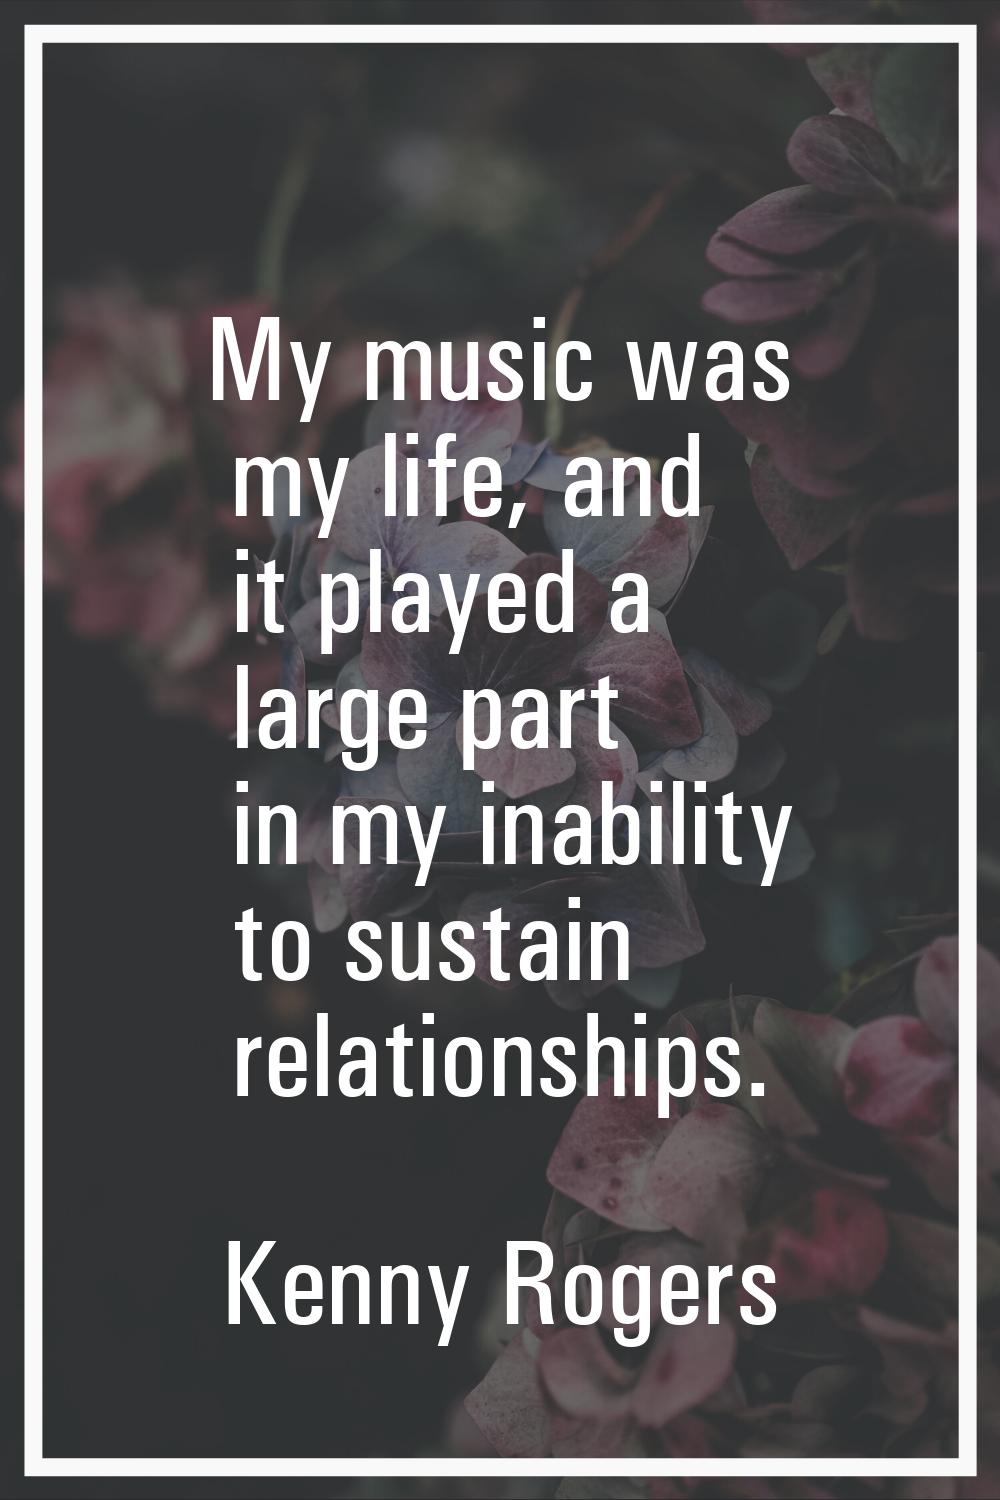 My music was my life, and it played a large part in my inability to sustain relationships.